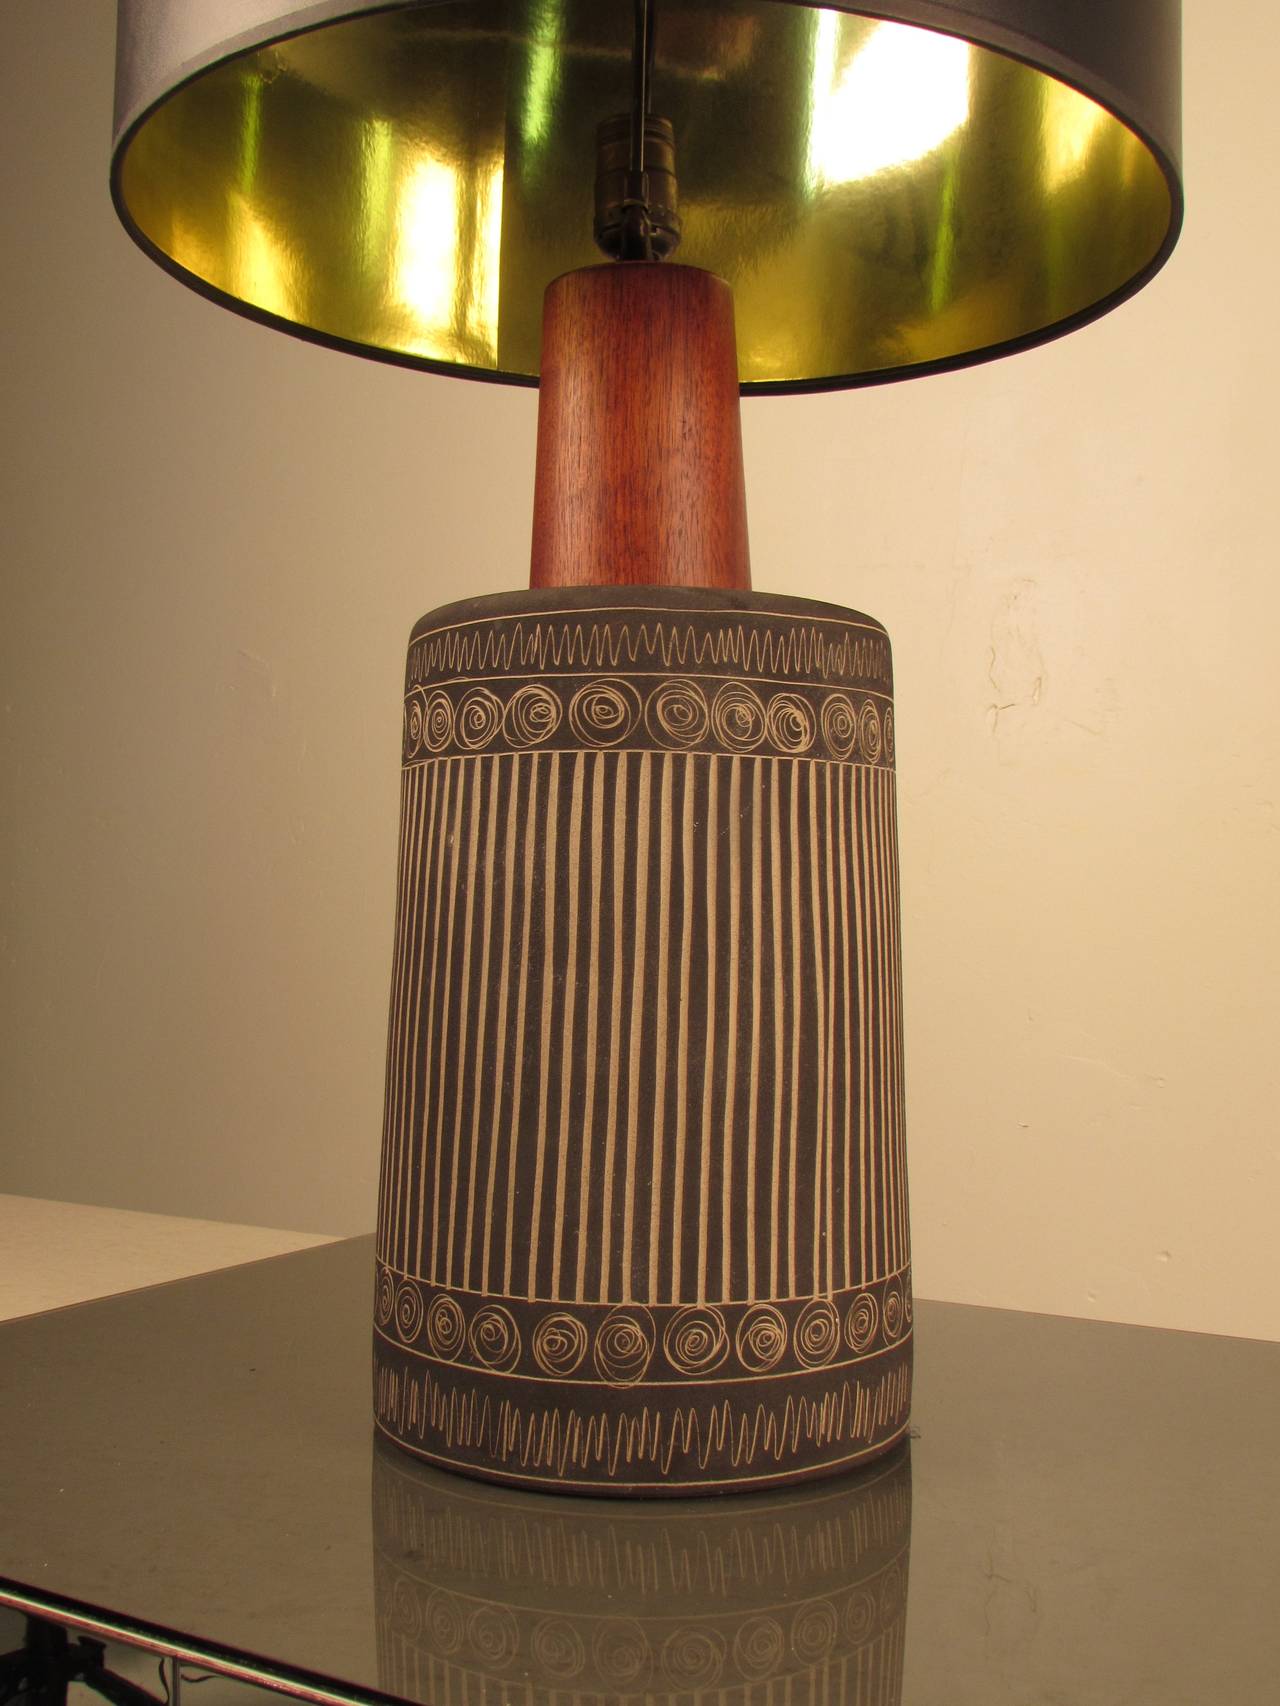 American Incomparable Gordon + Jane Martz Lamp with Incised Decoration